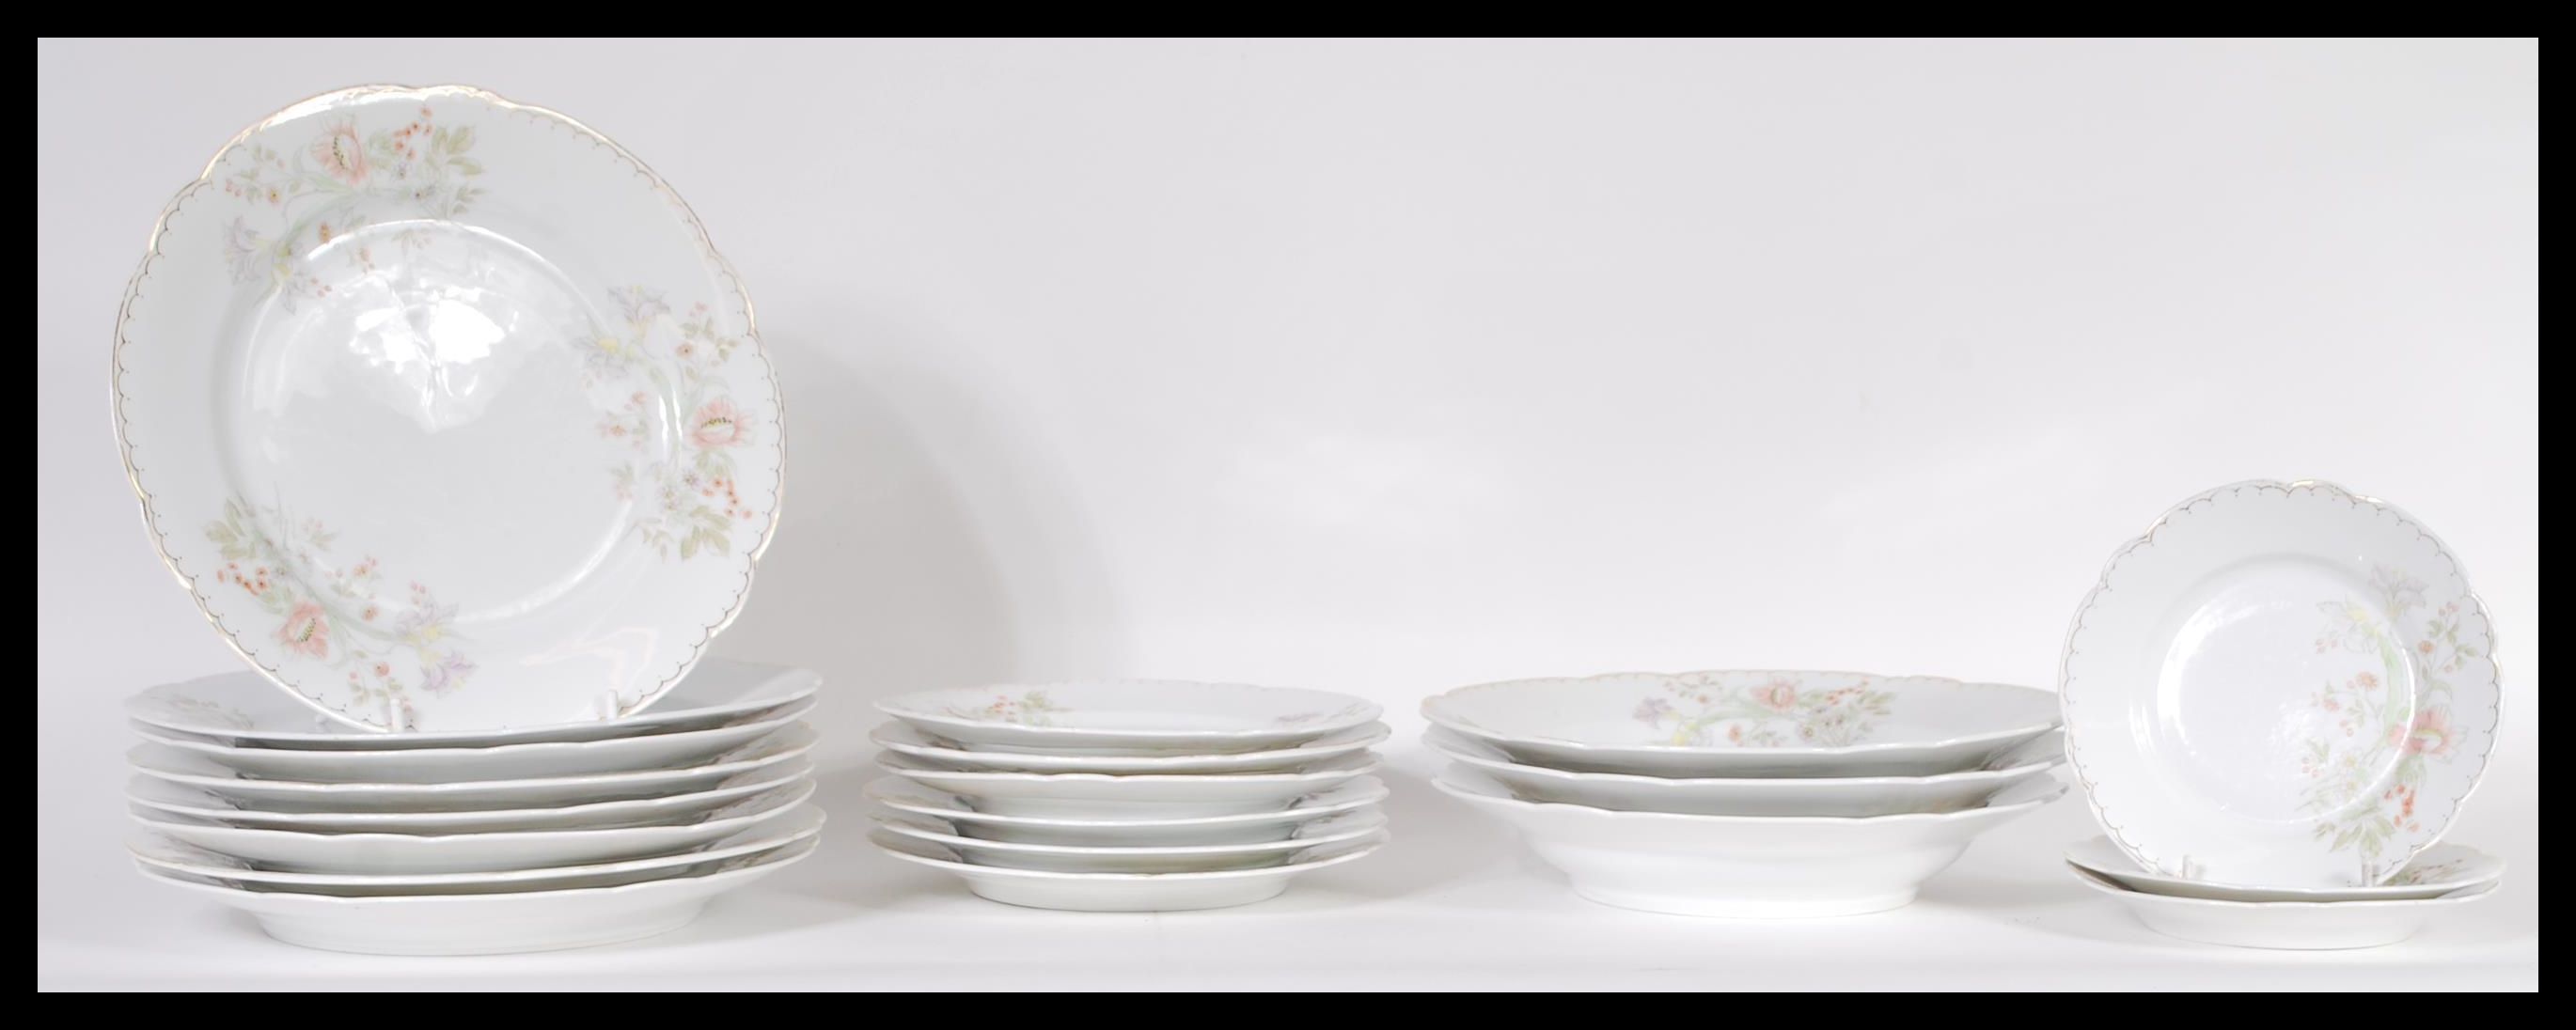 A 20th Century German porcelain dinner service having hand painted floral decoration consisting of